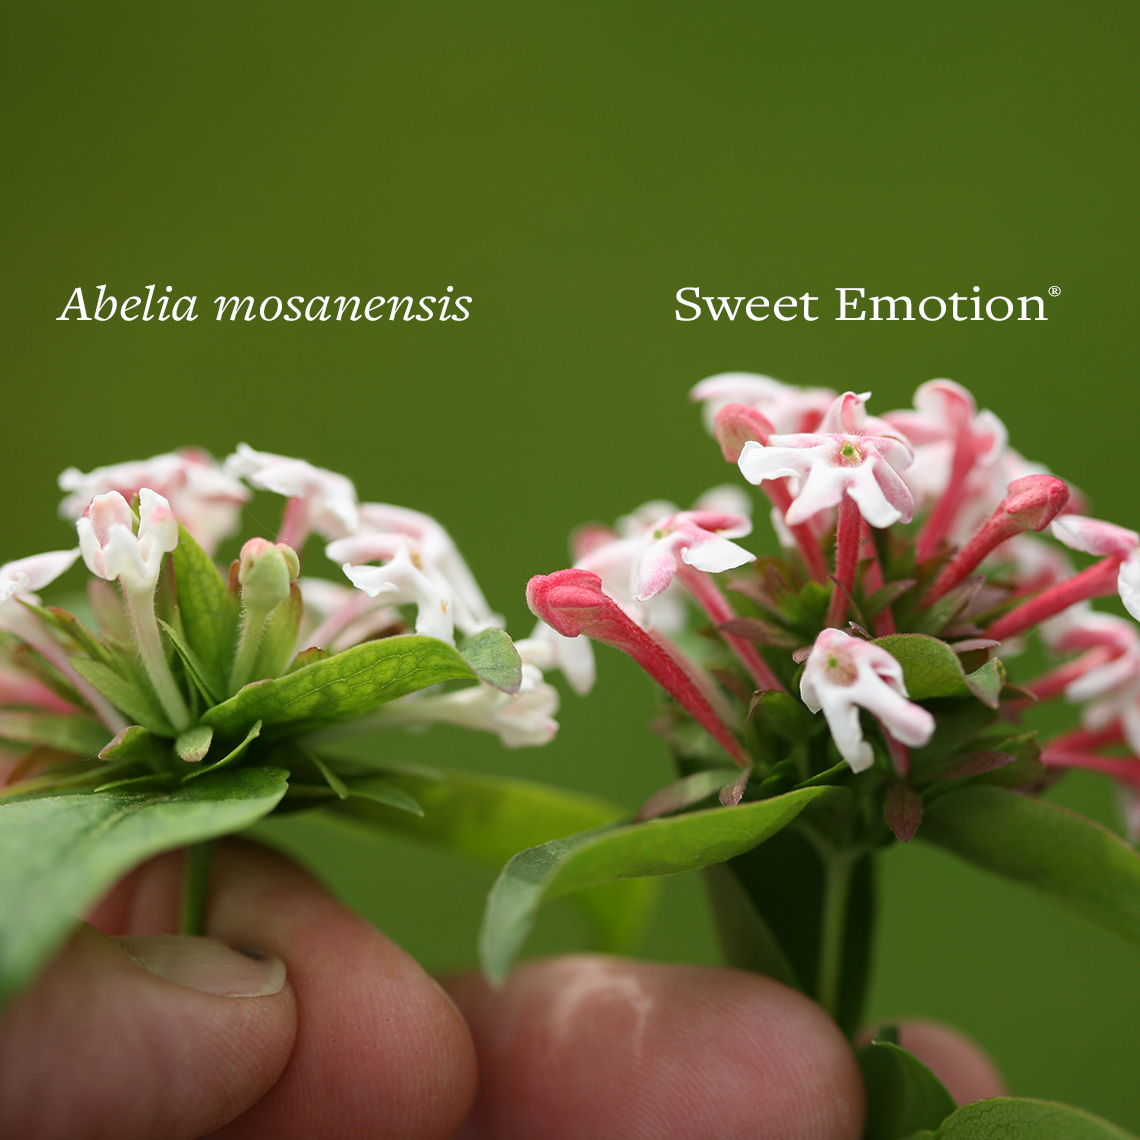 The vibrant pink blooms of Sweet Emotion Abelia compared to the pale pink blooms of the Abelia mosanensis